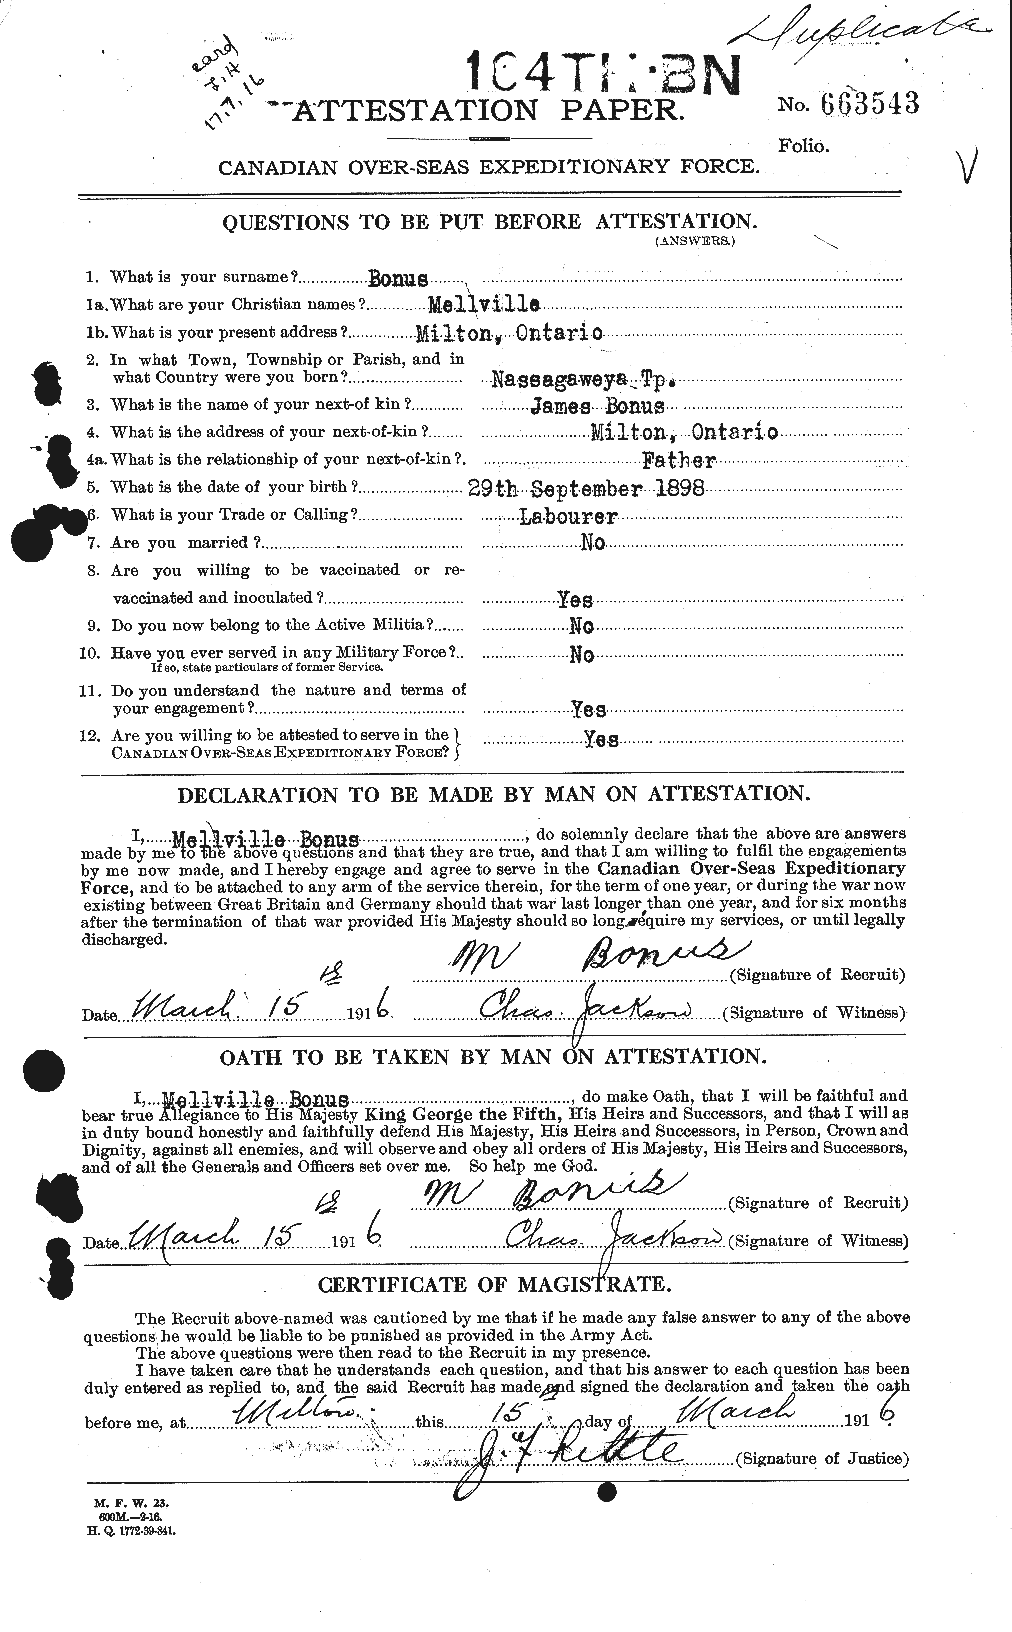 Personnel Records of the First World War - CEF 251198a